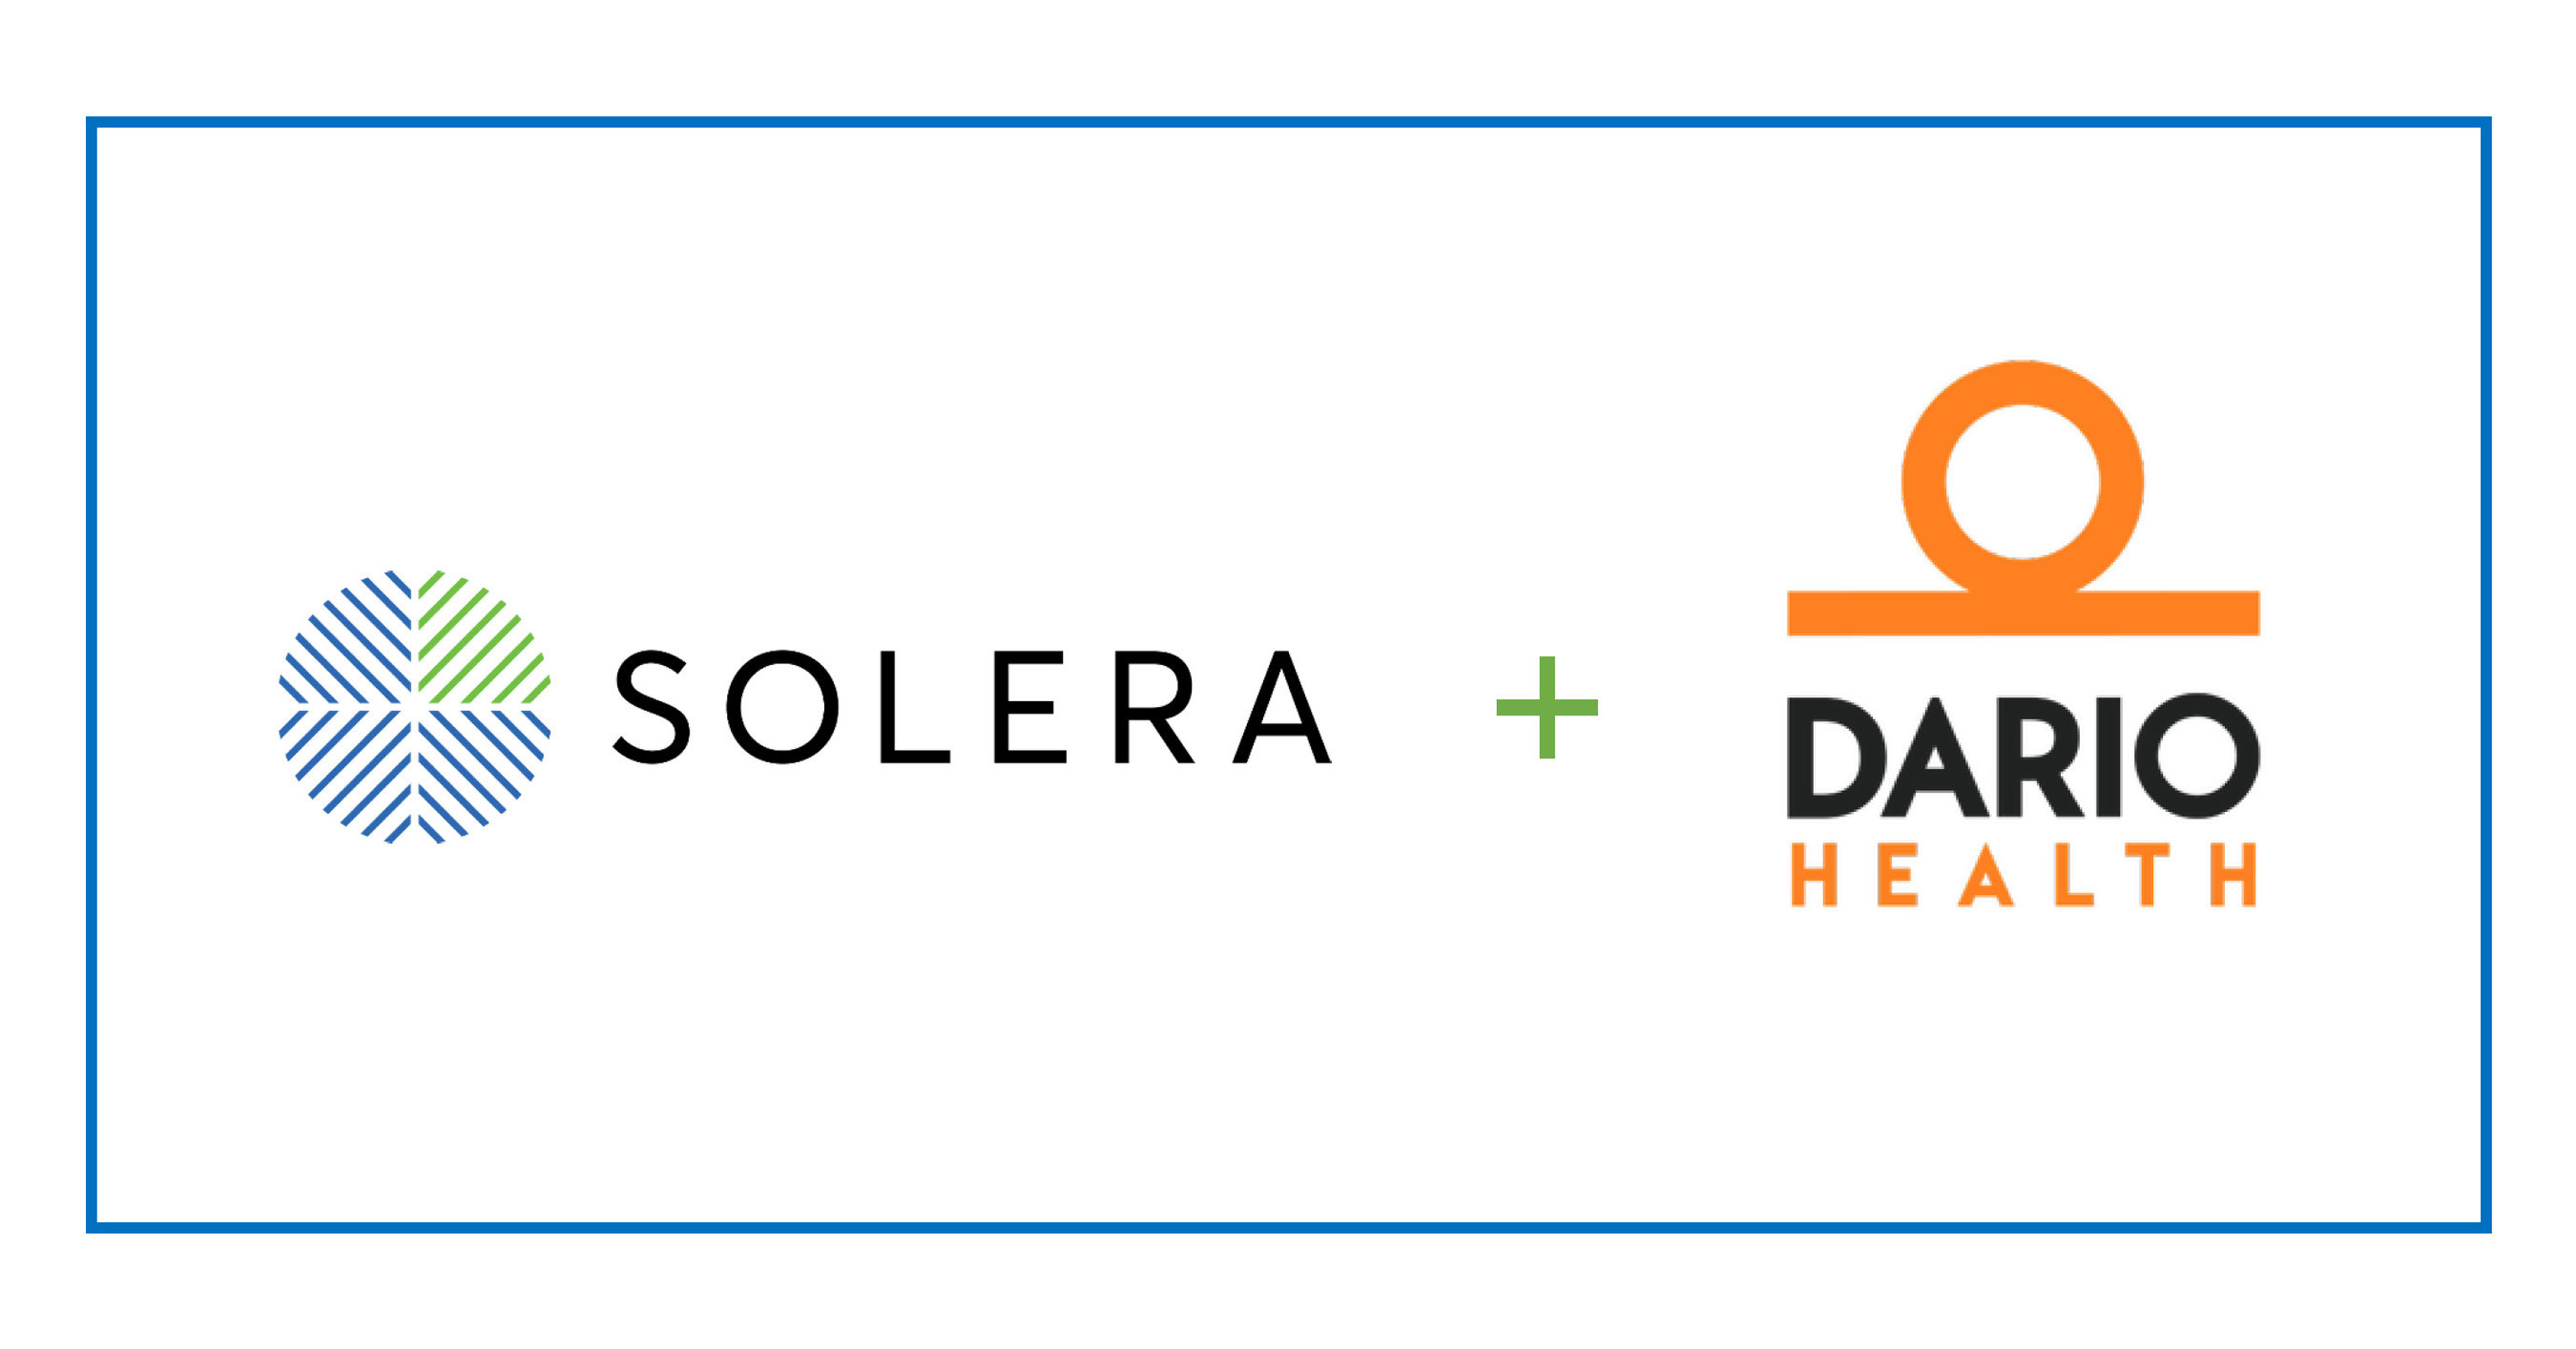 Solera Health Adds DarioHealth to Its Cardiometabolic Network to Offer  Hypertension Management Solutions